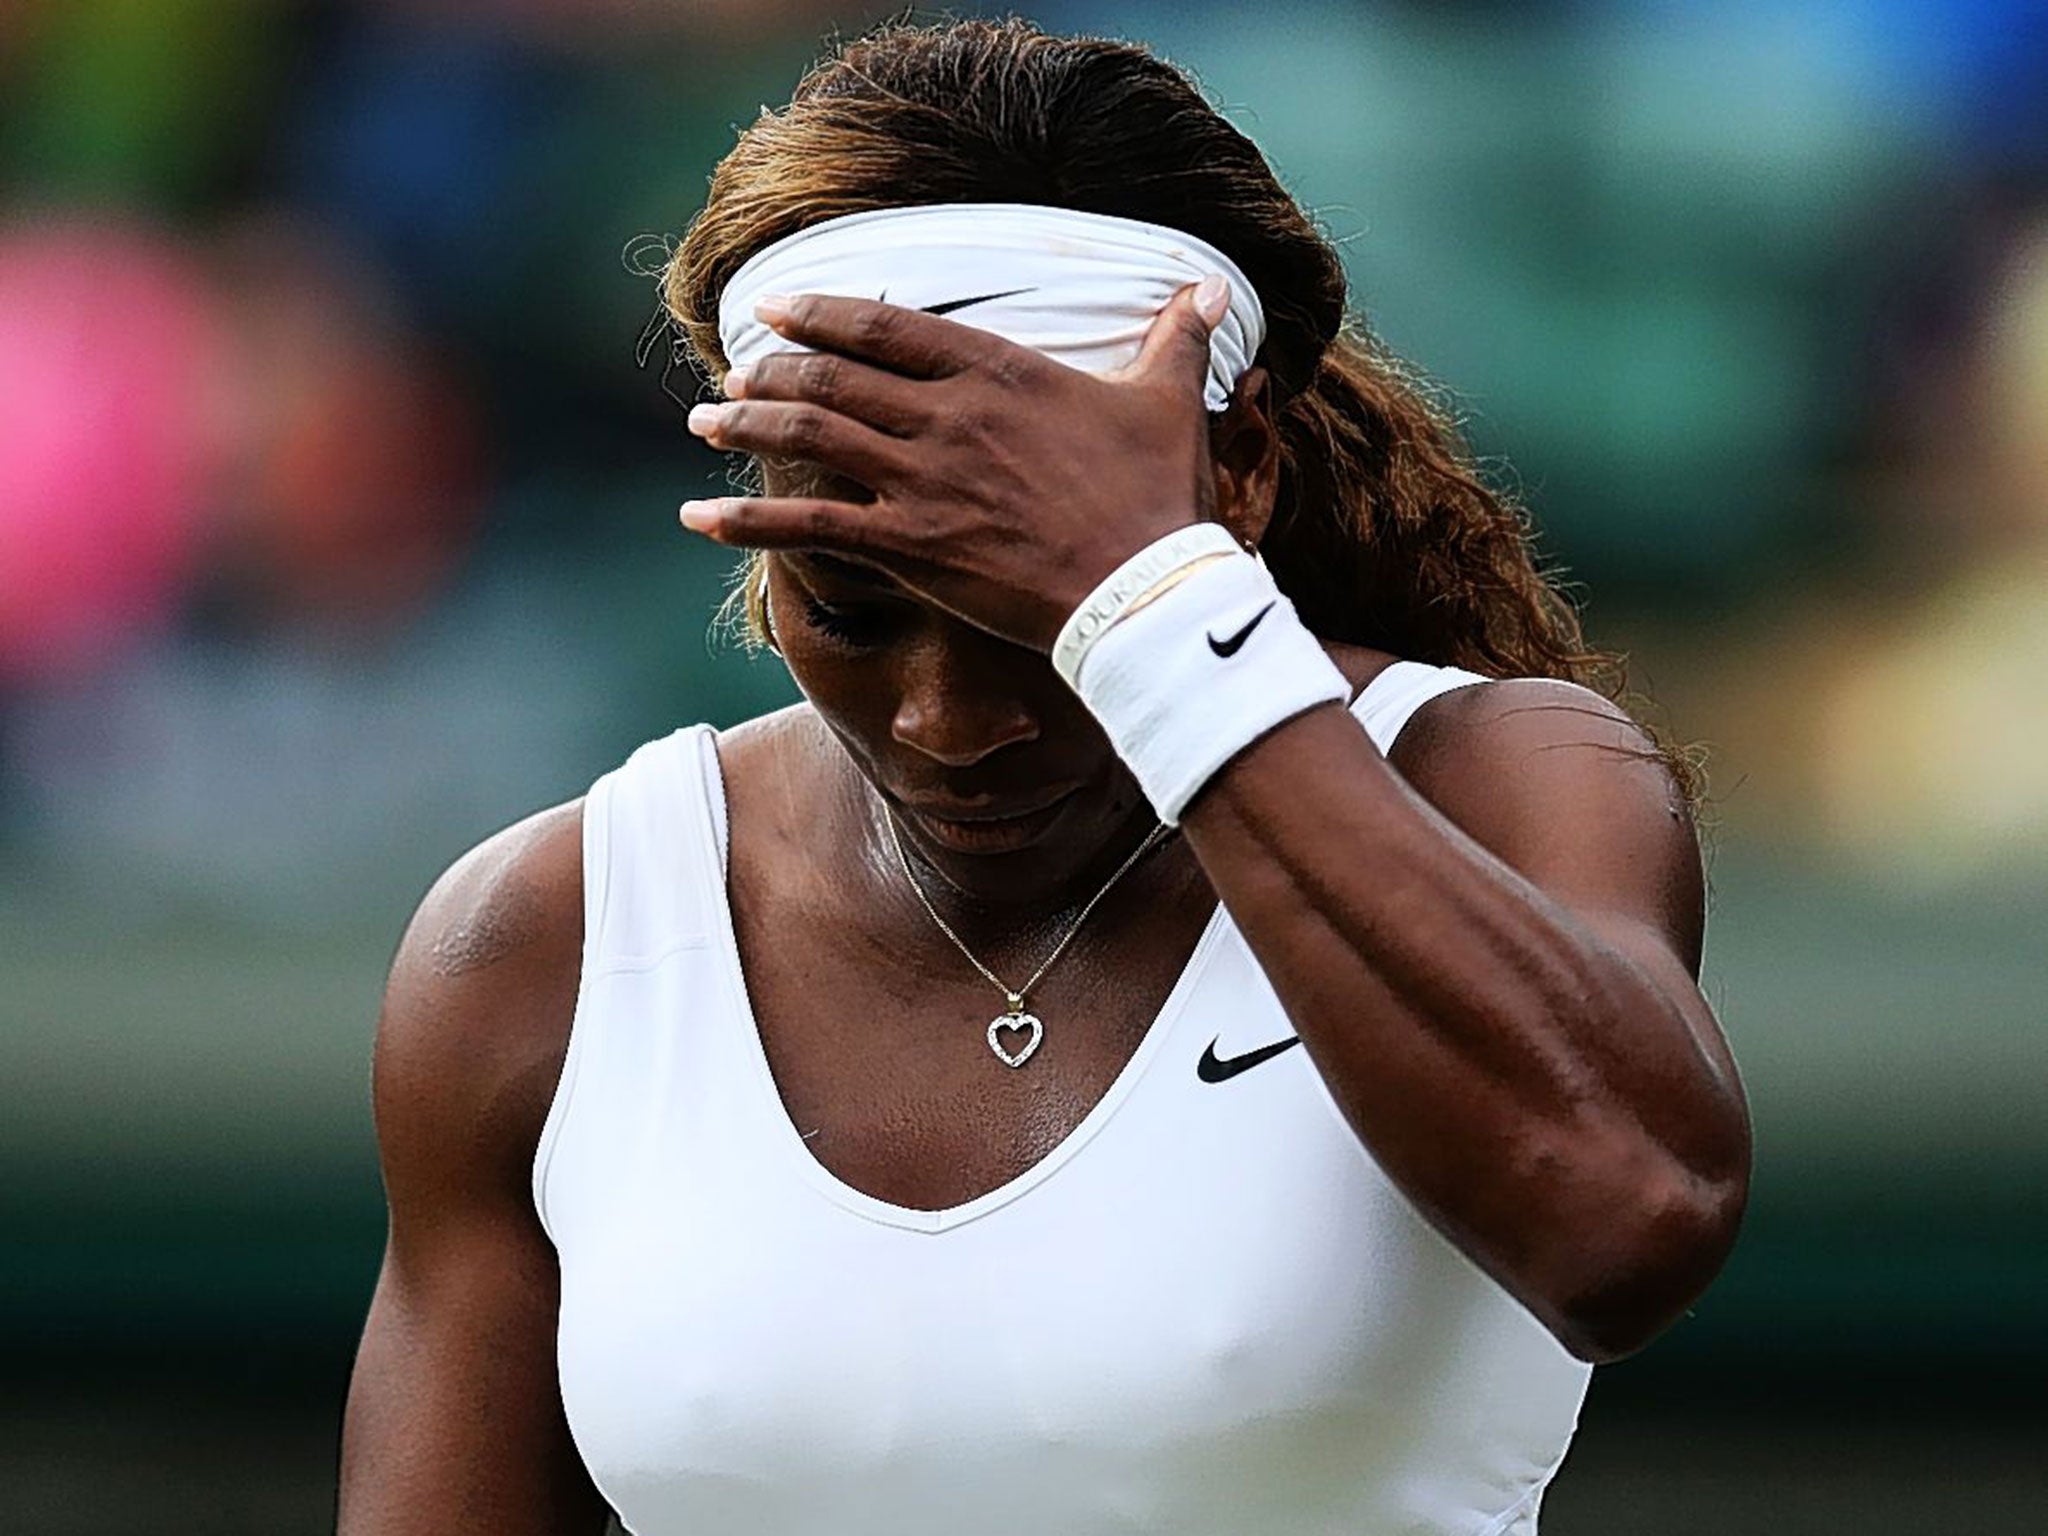 Serena Williams fails to find the answers as she crashes out of Wimbledon on Saturday